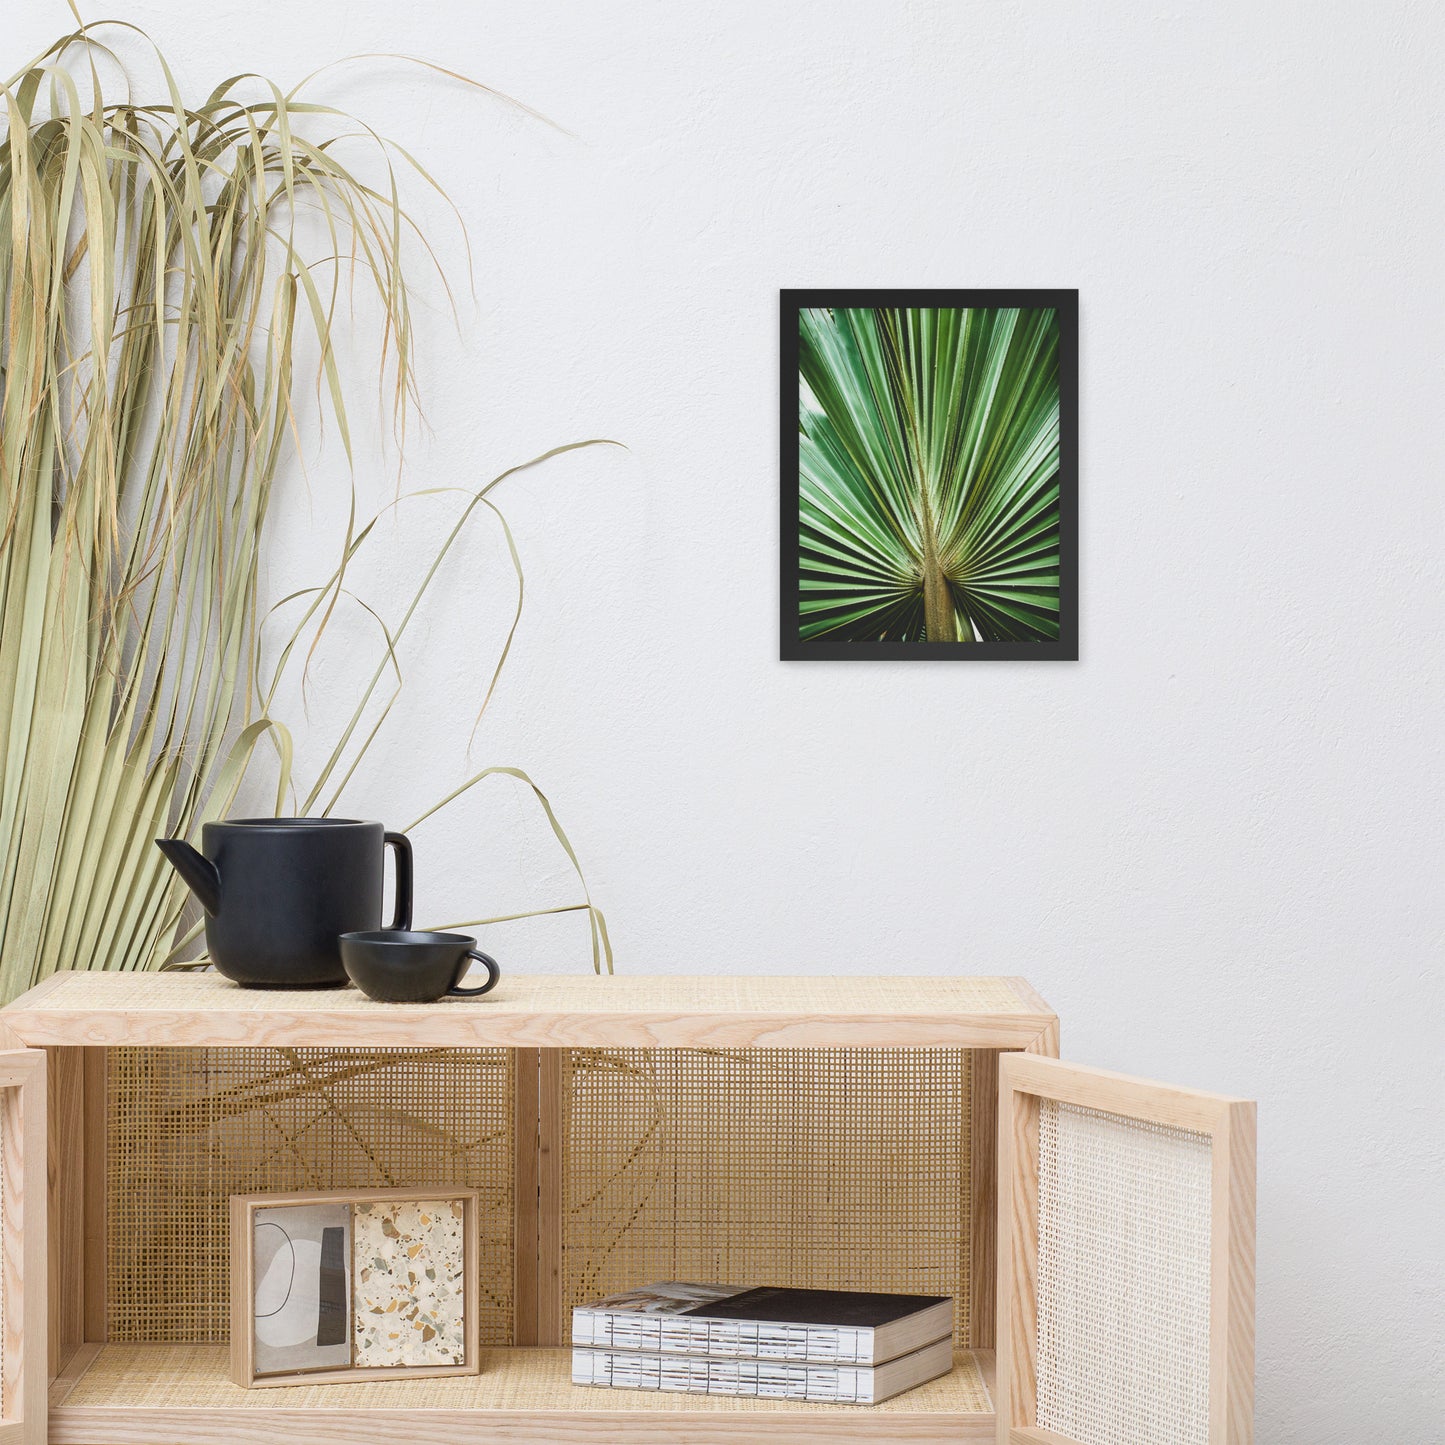 Framed Art For Dining Room: Aged and Colorized Wide Palm Leaves 2 Tropical Botanical / Nature Photo Framed Wall Art Print - Artwork - Wall Decor